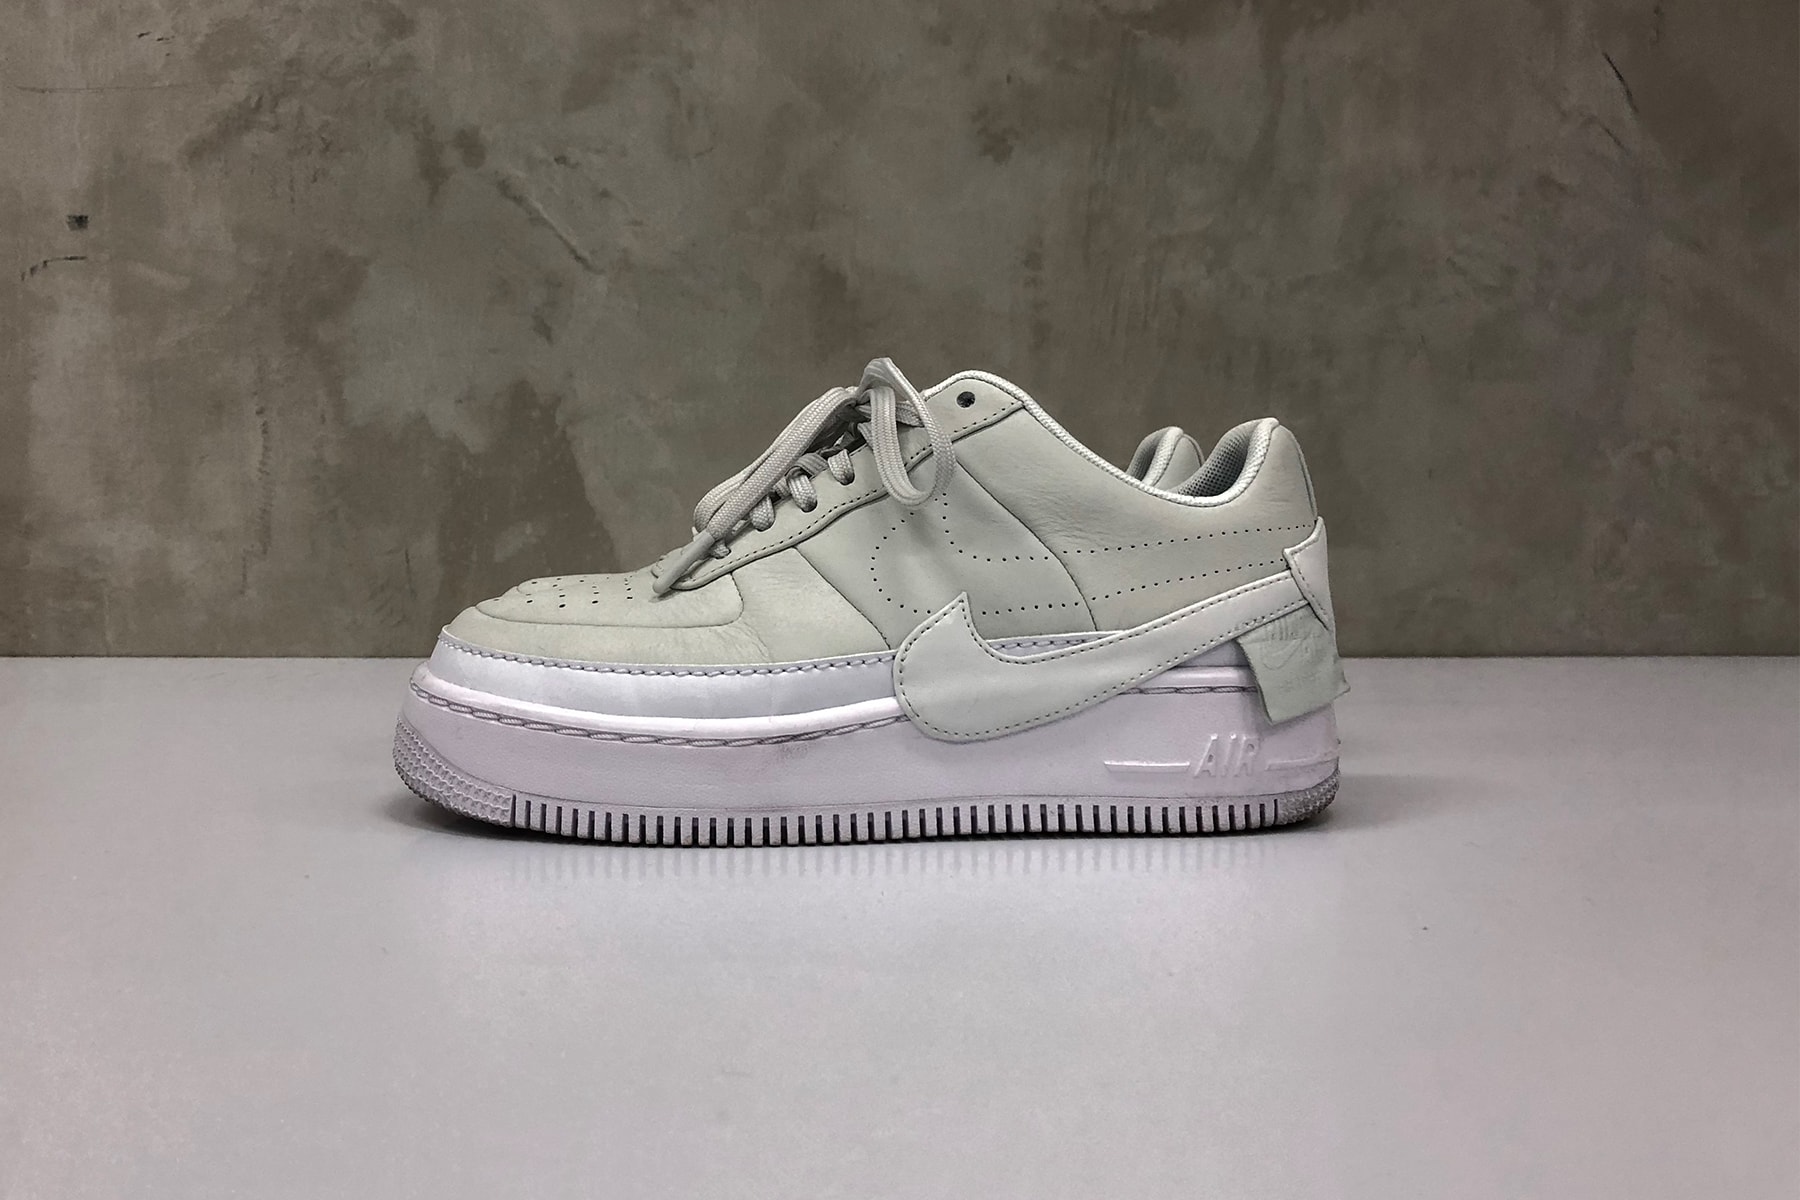 hypebaekicks review nike air force 1 jester xx the 1 reimagined pack side view